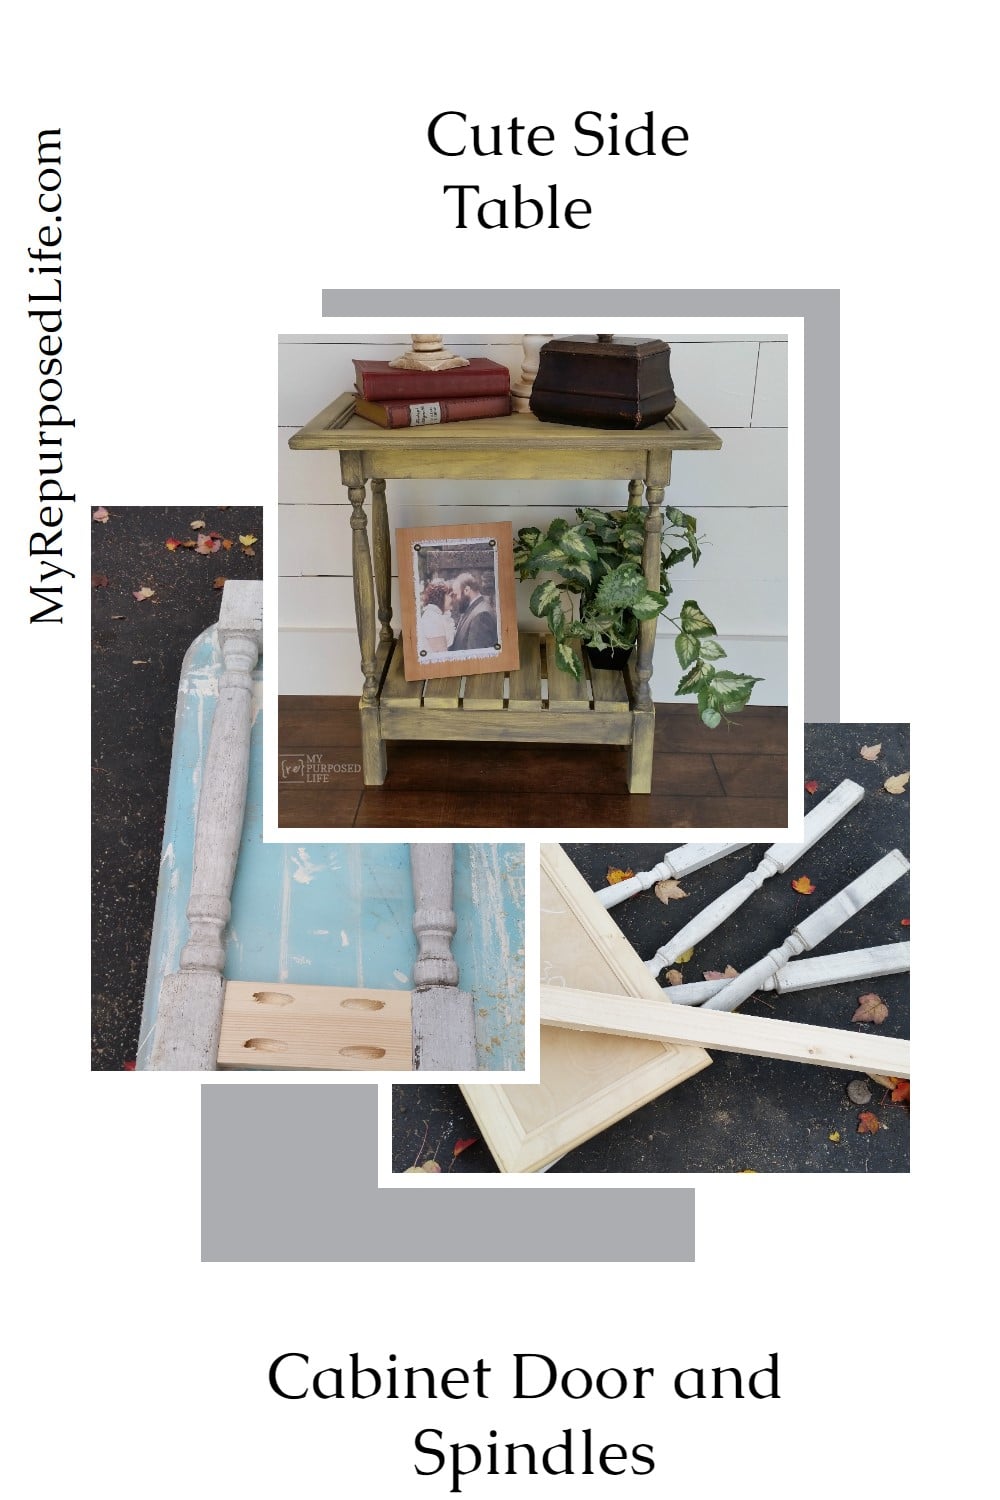 Cabinet Door Side Table Using bits and pieces you can easily build your own custom side table. #MyRepurposedLife #diy #repurposed #bits&pieces #spindles #cabinetdoor #repurposed via @repurposedlife